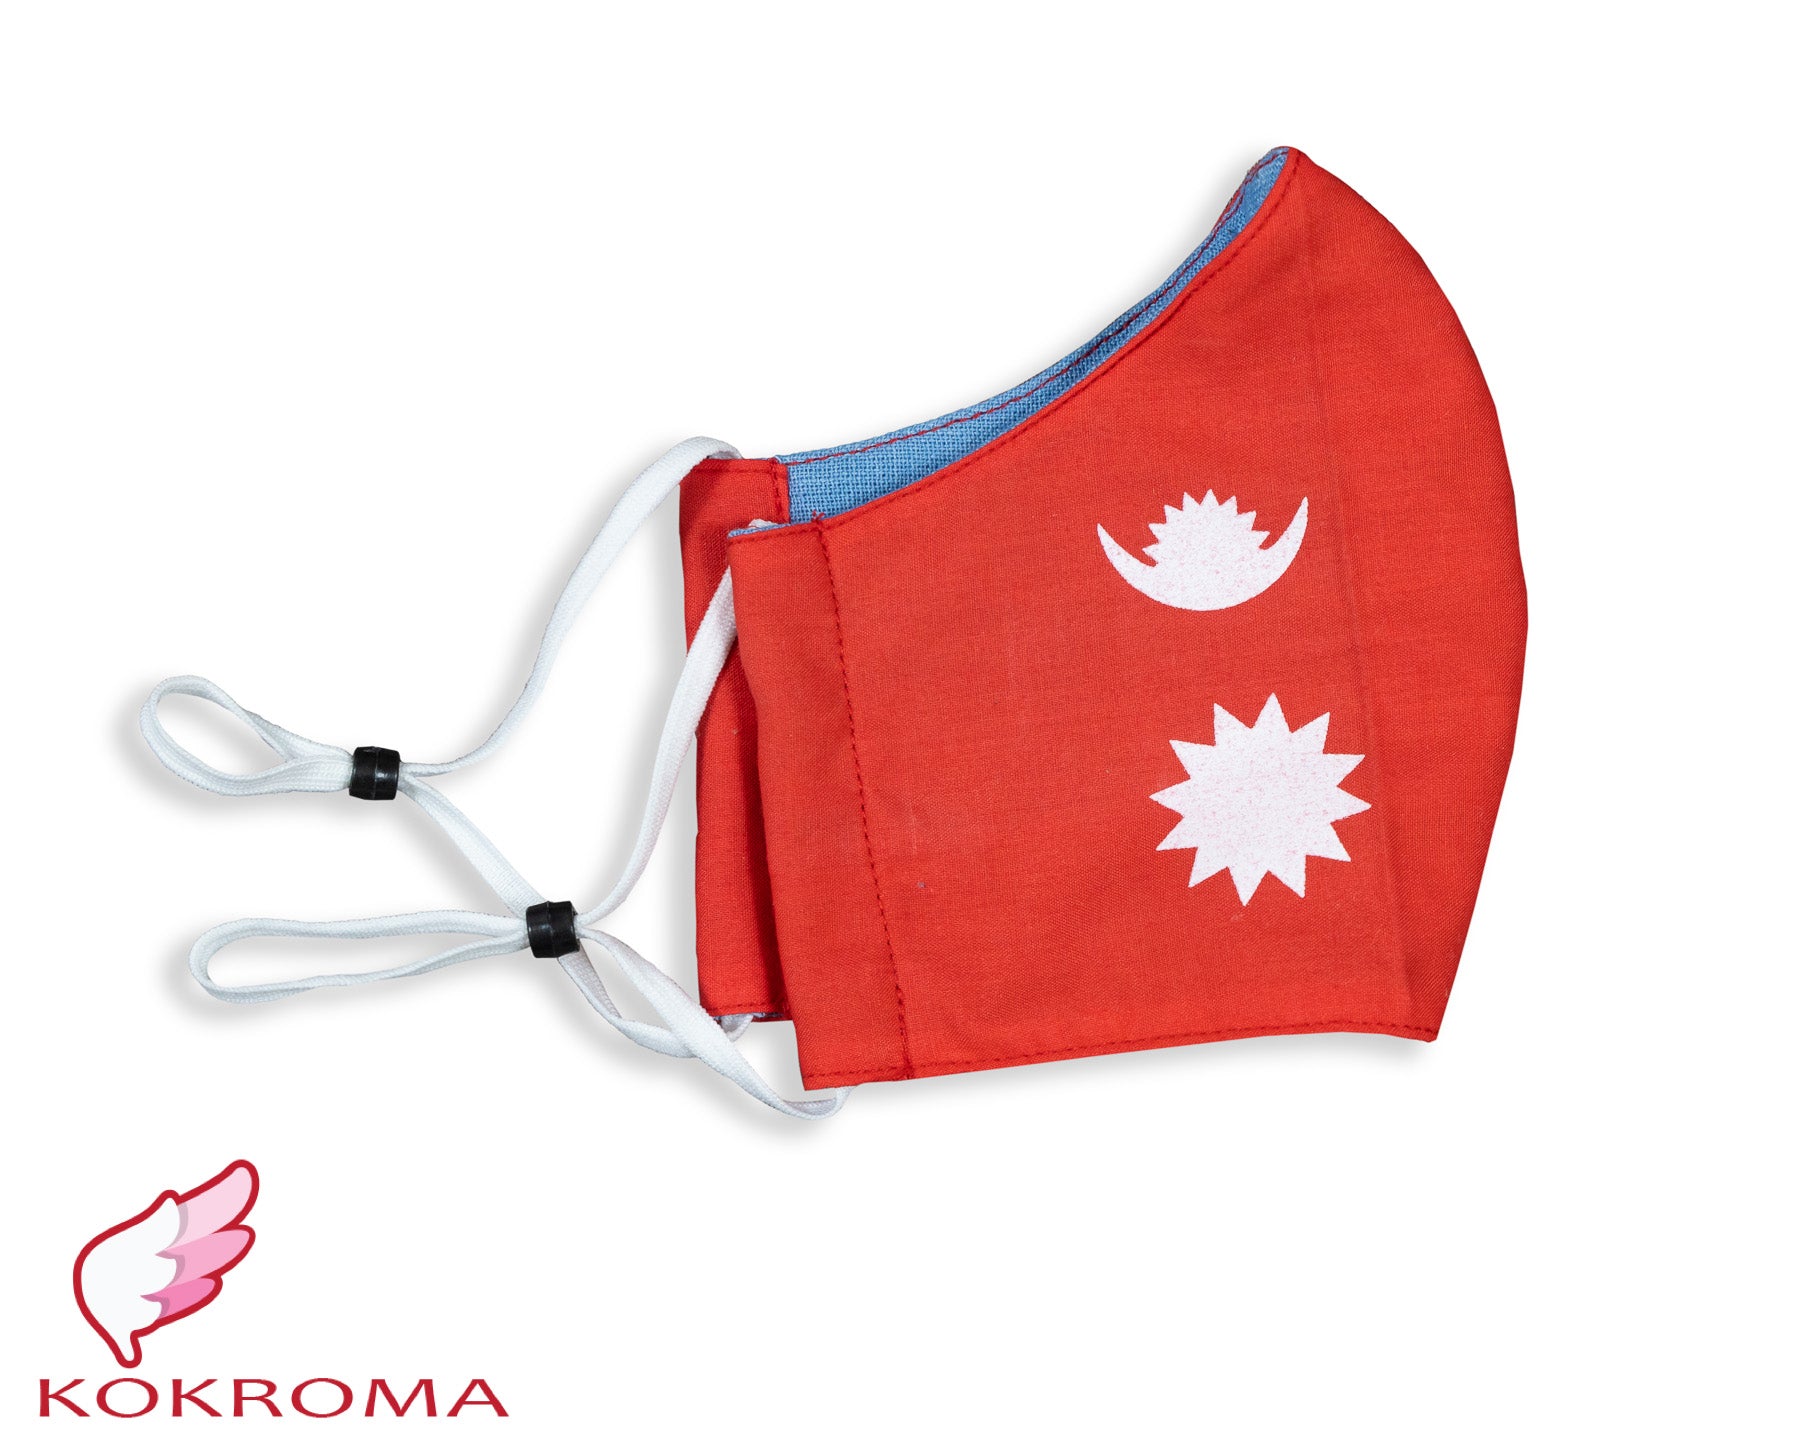 Our Nepali Flag masks have been protecting our customers since the start of Covid-19. To date we have made hundreds of thousands of cotton 3 layer masks and now our NEW model comes in an assortment of bright colours to match your clothes on any occasion.